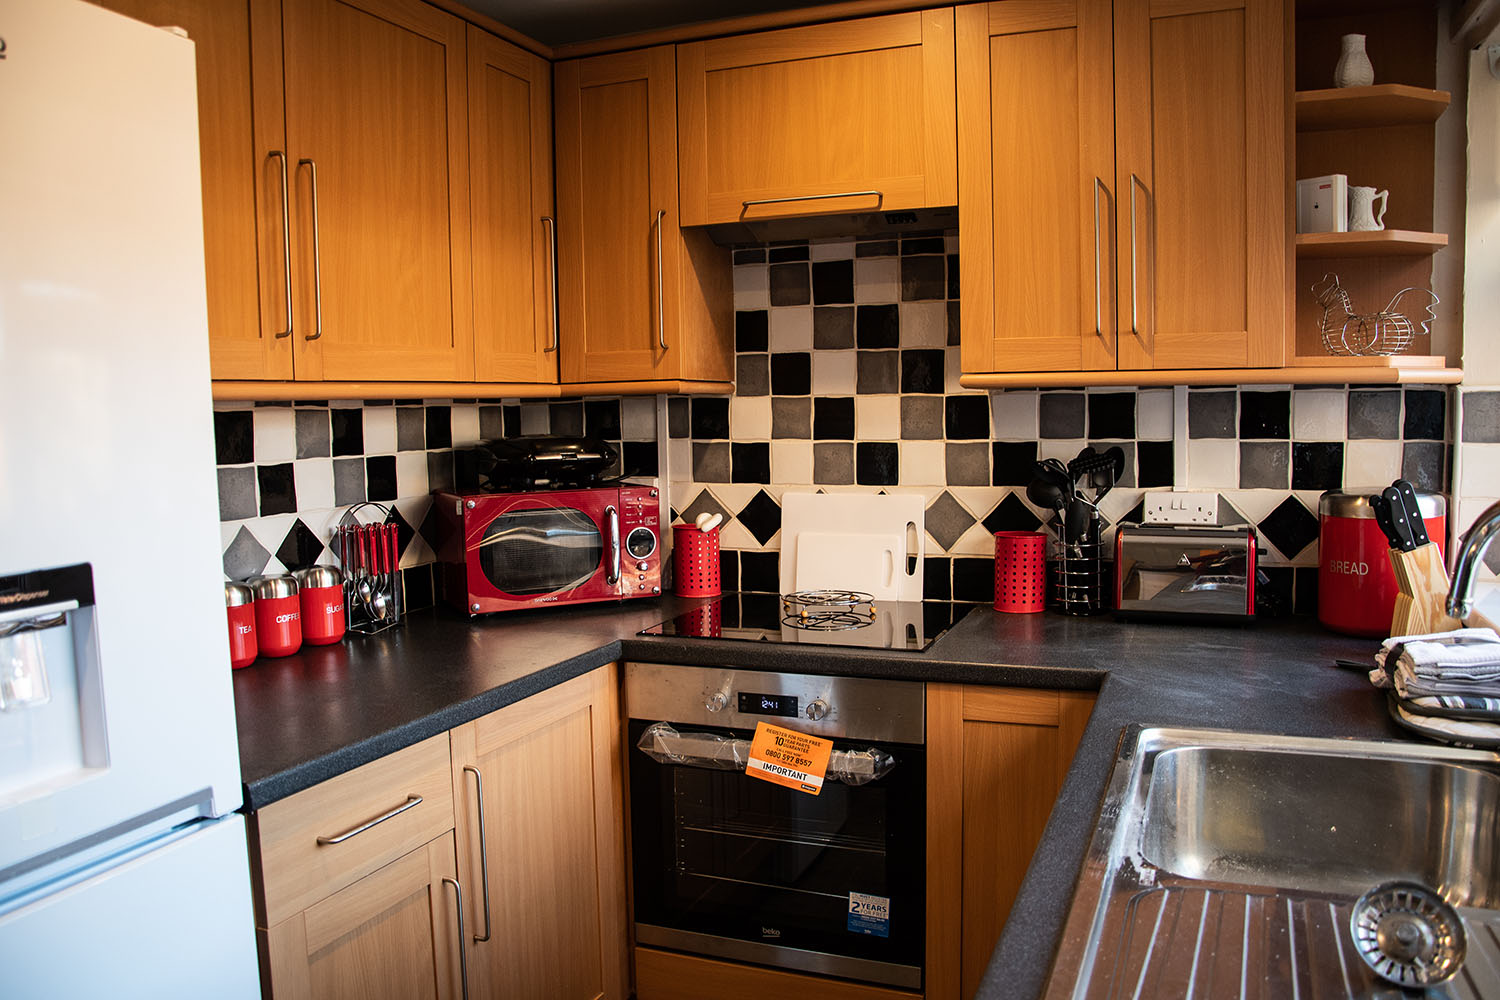 A kitchen with wooden cabinets and black, white and grey tiles and red appliances